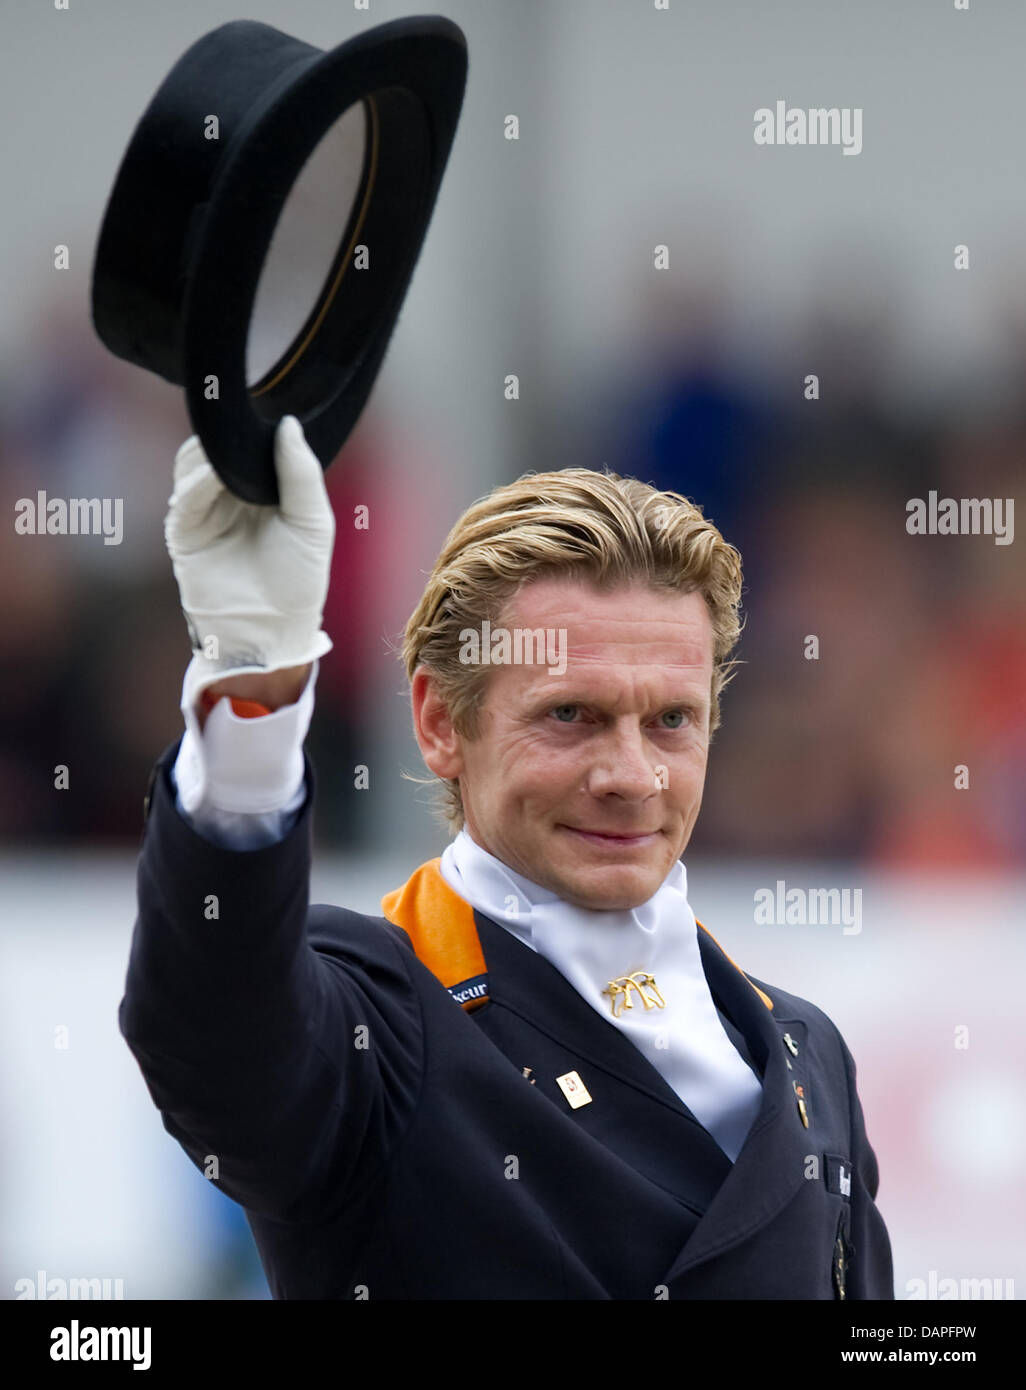 Dutch Dressage Rider Edward Gal Waves During The Team Competition Of